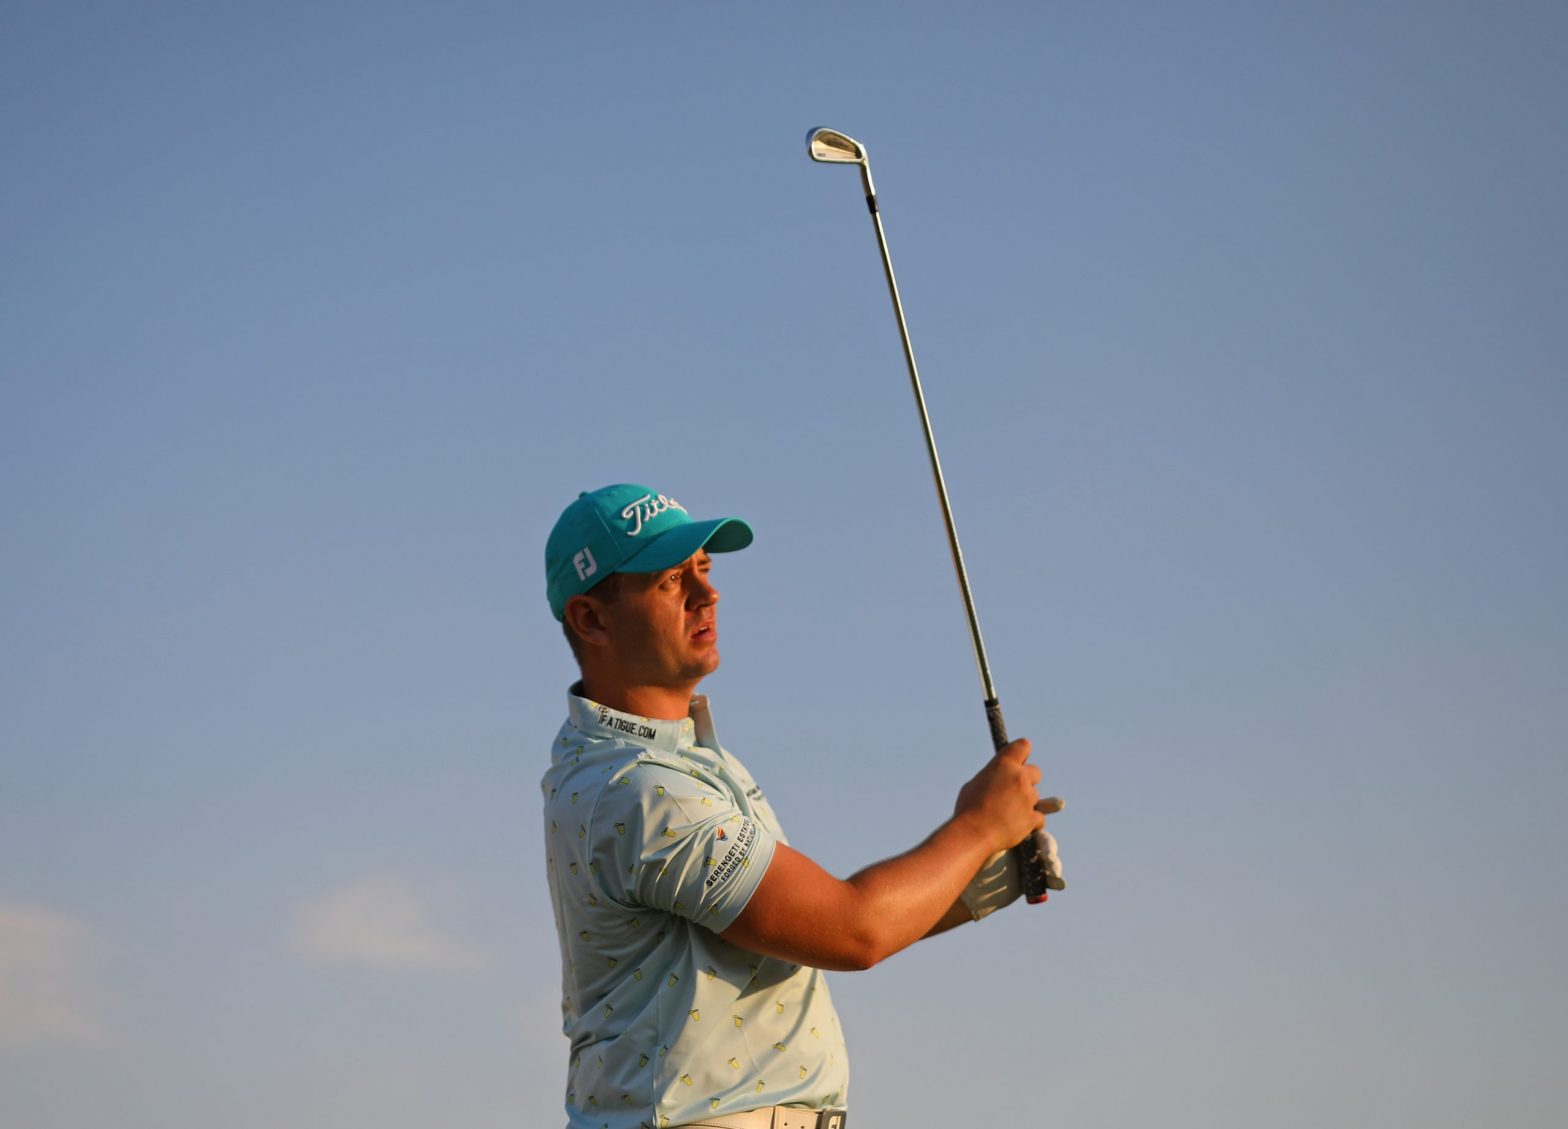 Van Tonder leads into weekend of Limpopo Championship